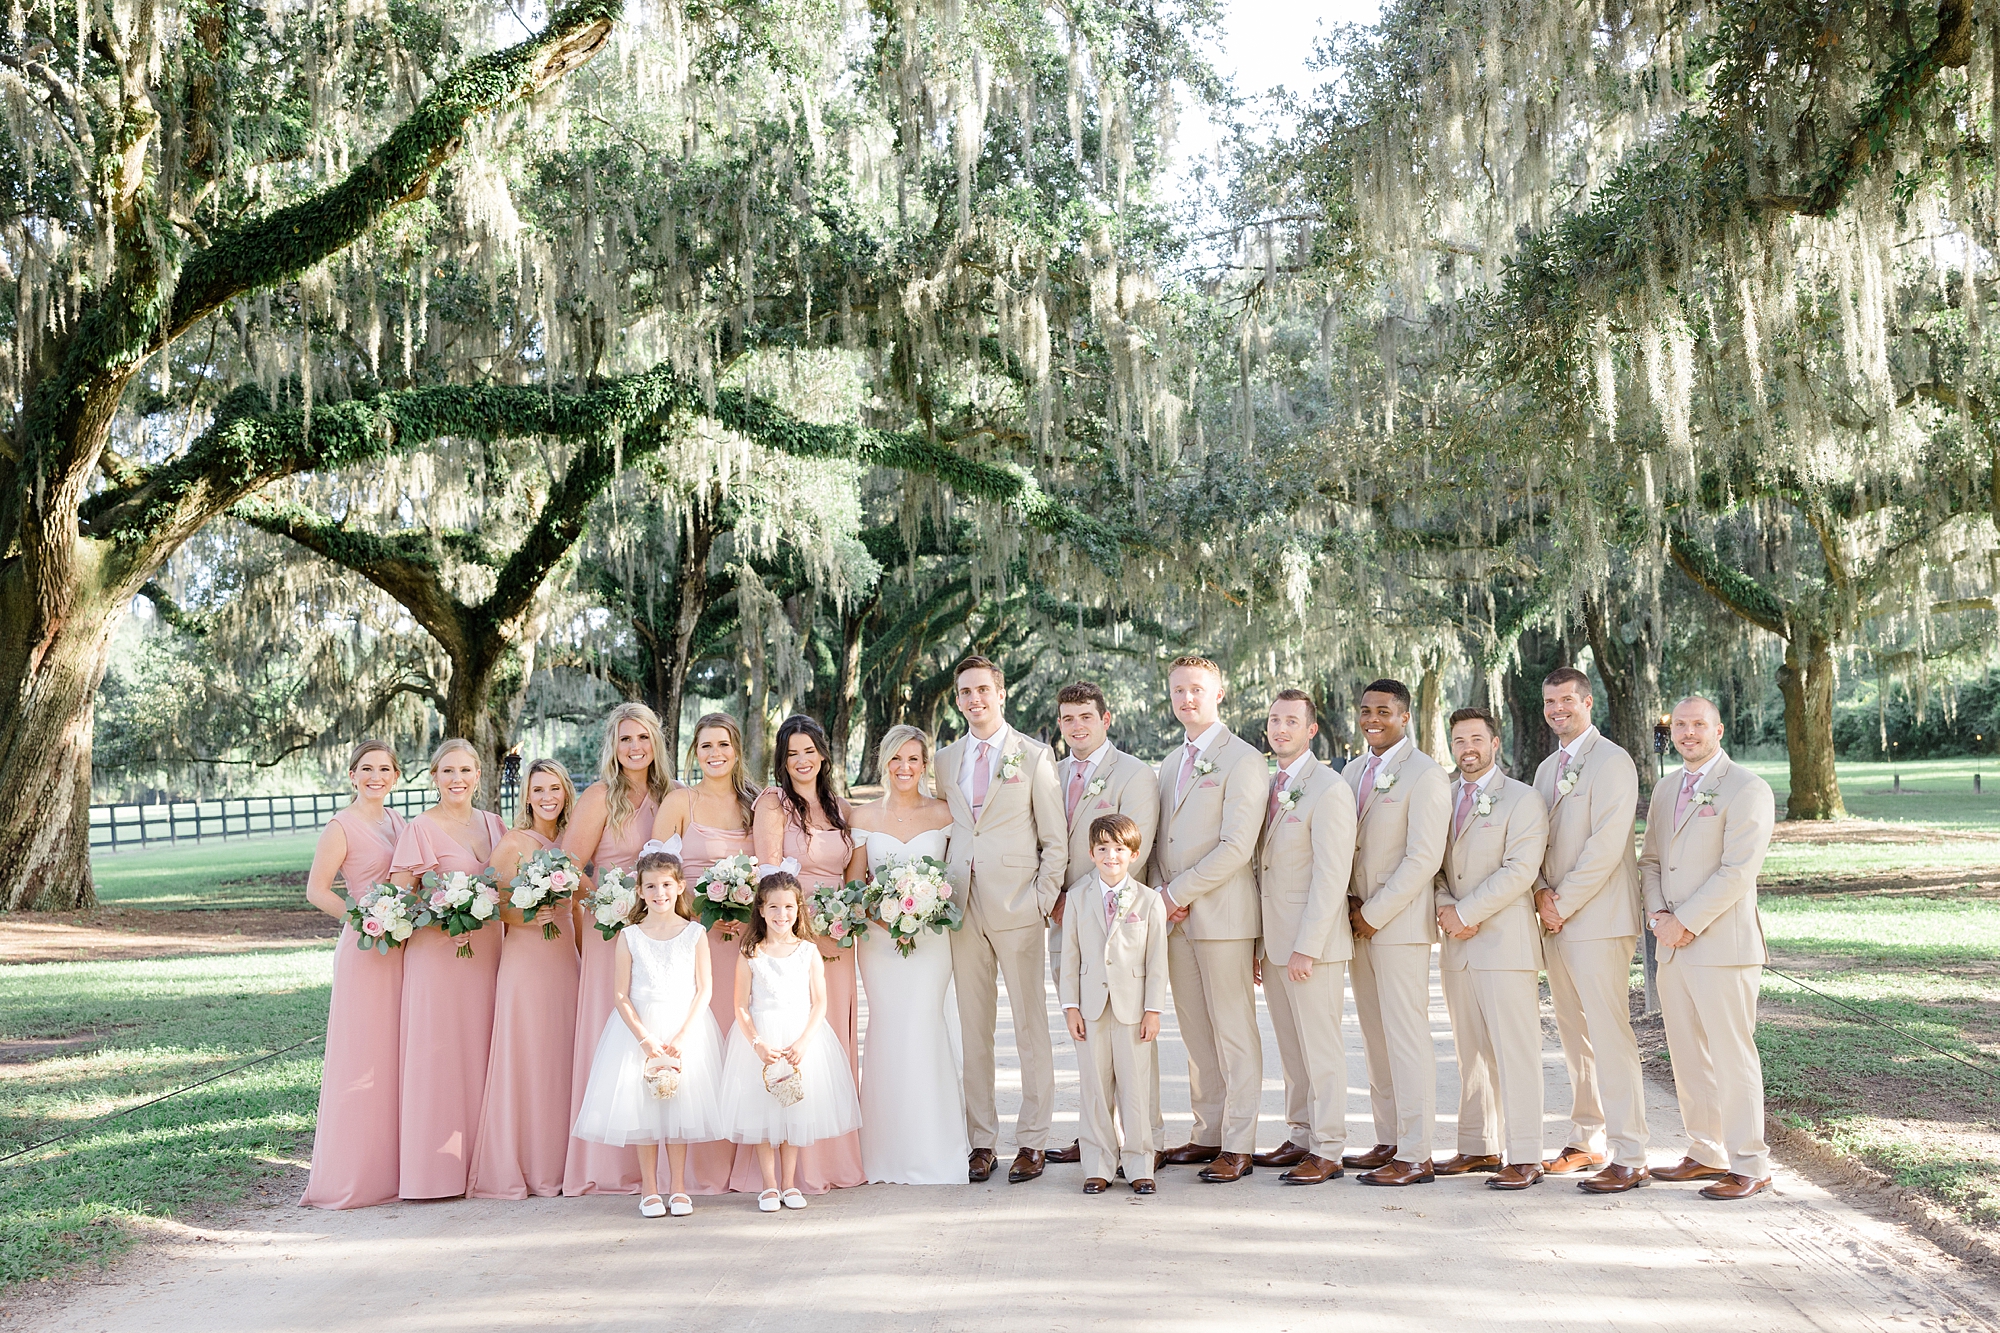 bride and groom stand with wedding party in tan and pink attire